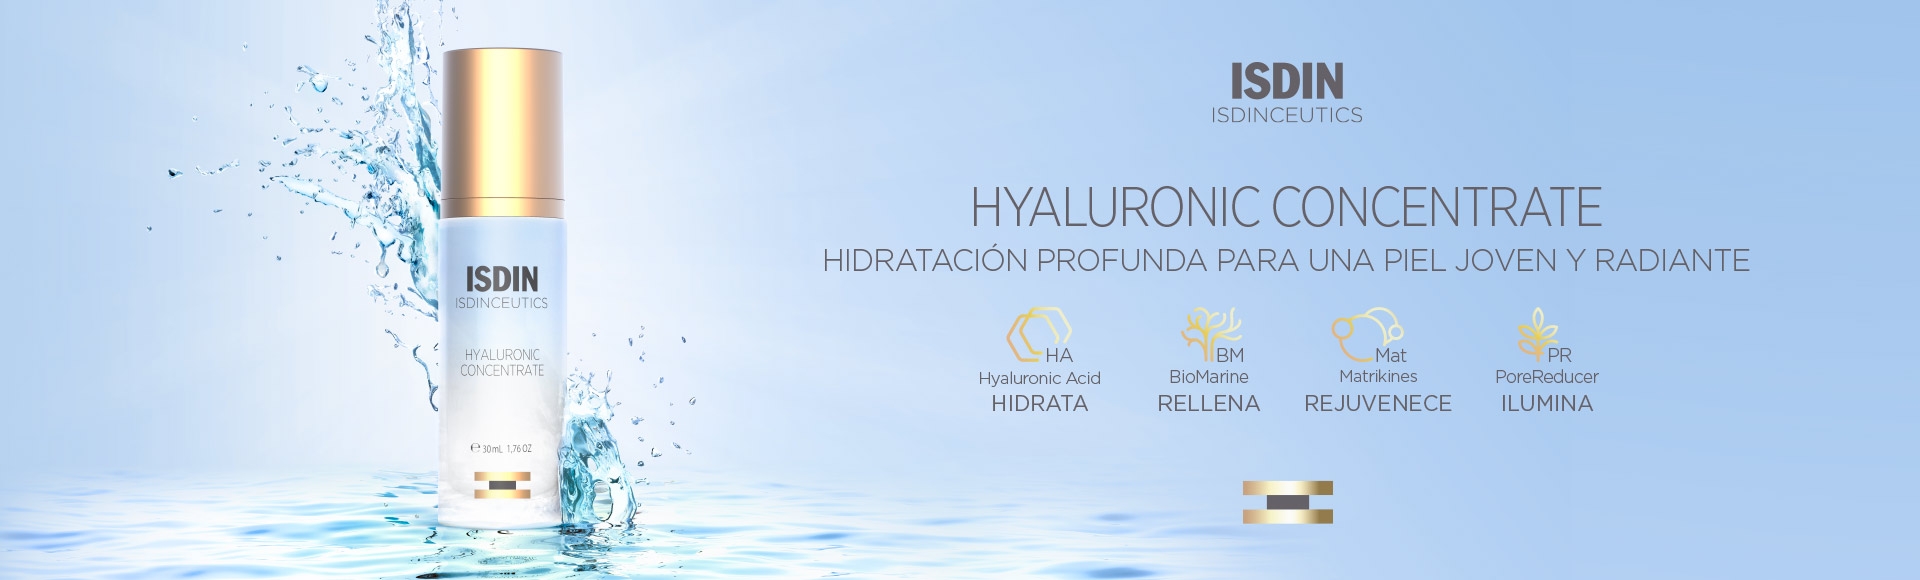 ISDINCEUTICS  Hyaluronic Concentrate Banner